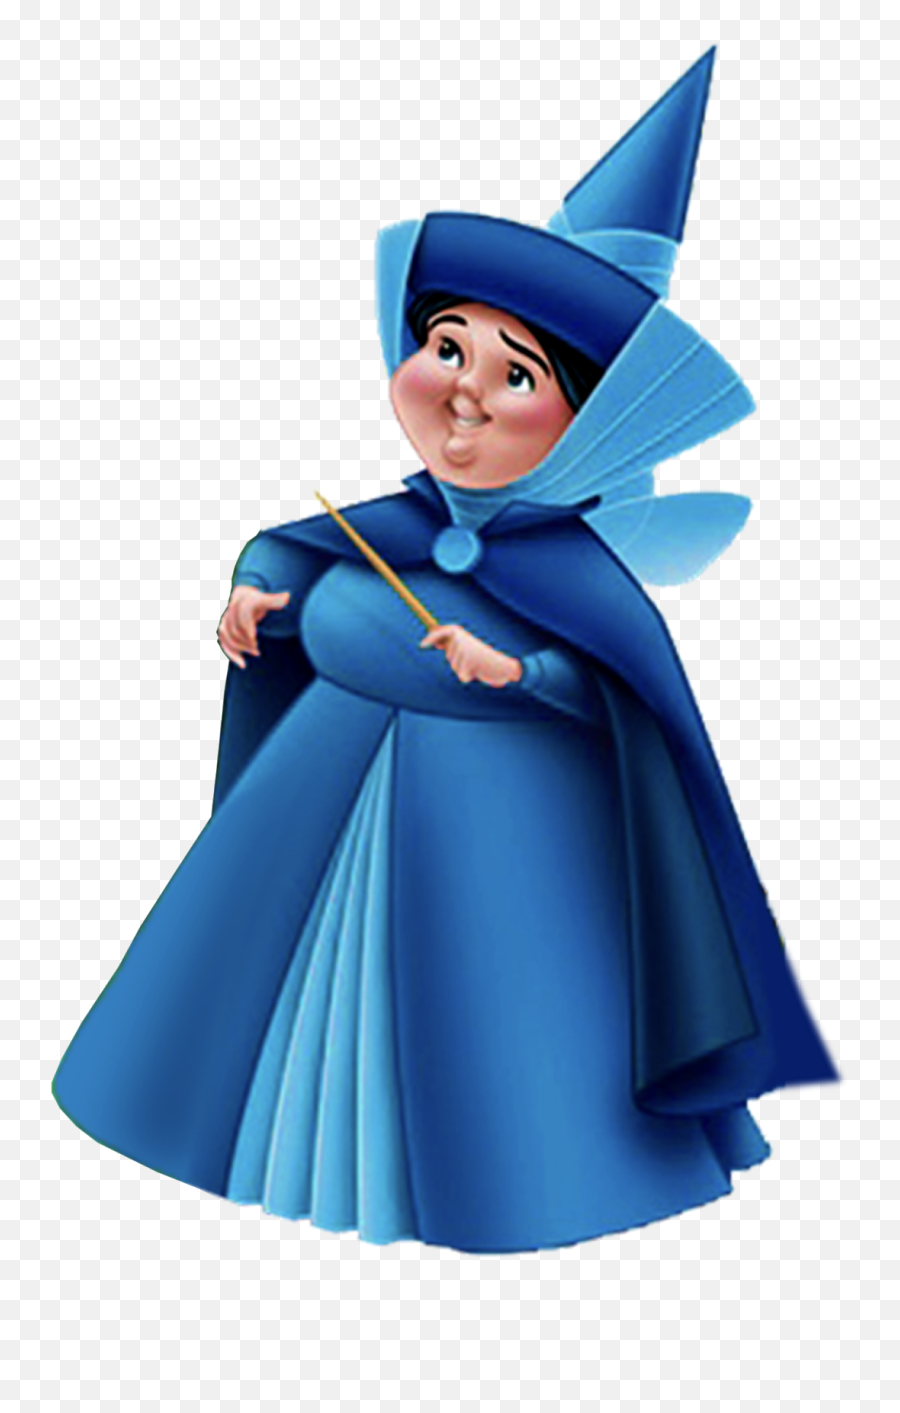 Fairy Godmother Png Picture - Merryweather Sleeping Beauty Fairies,Fairy Godmother Png